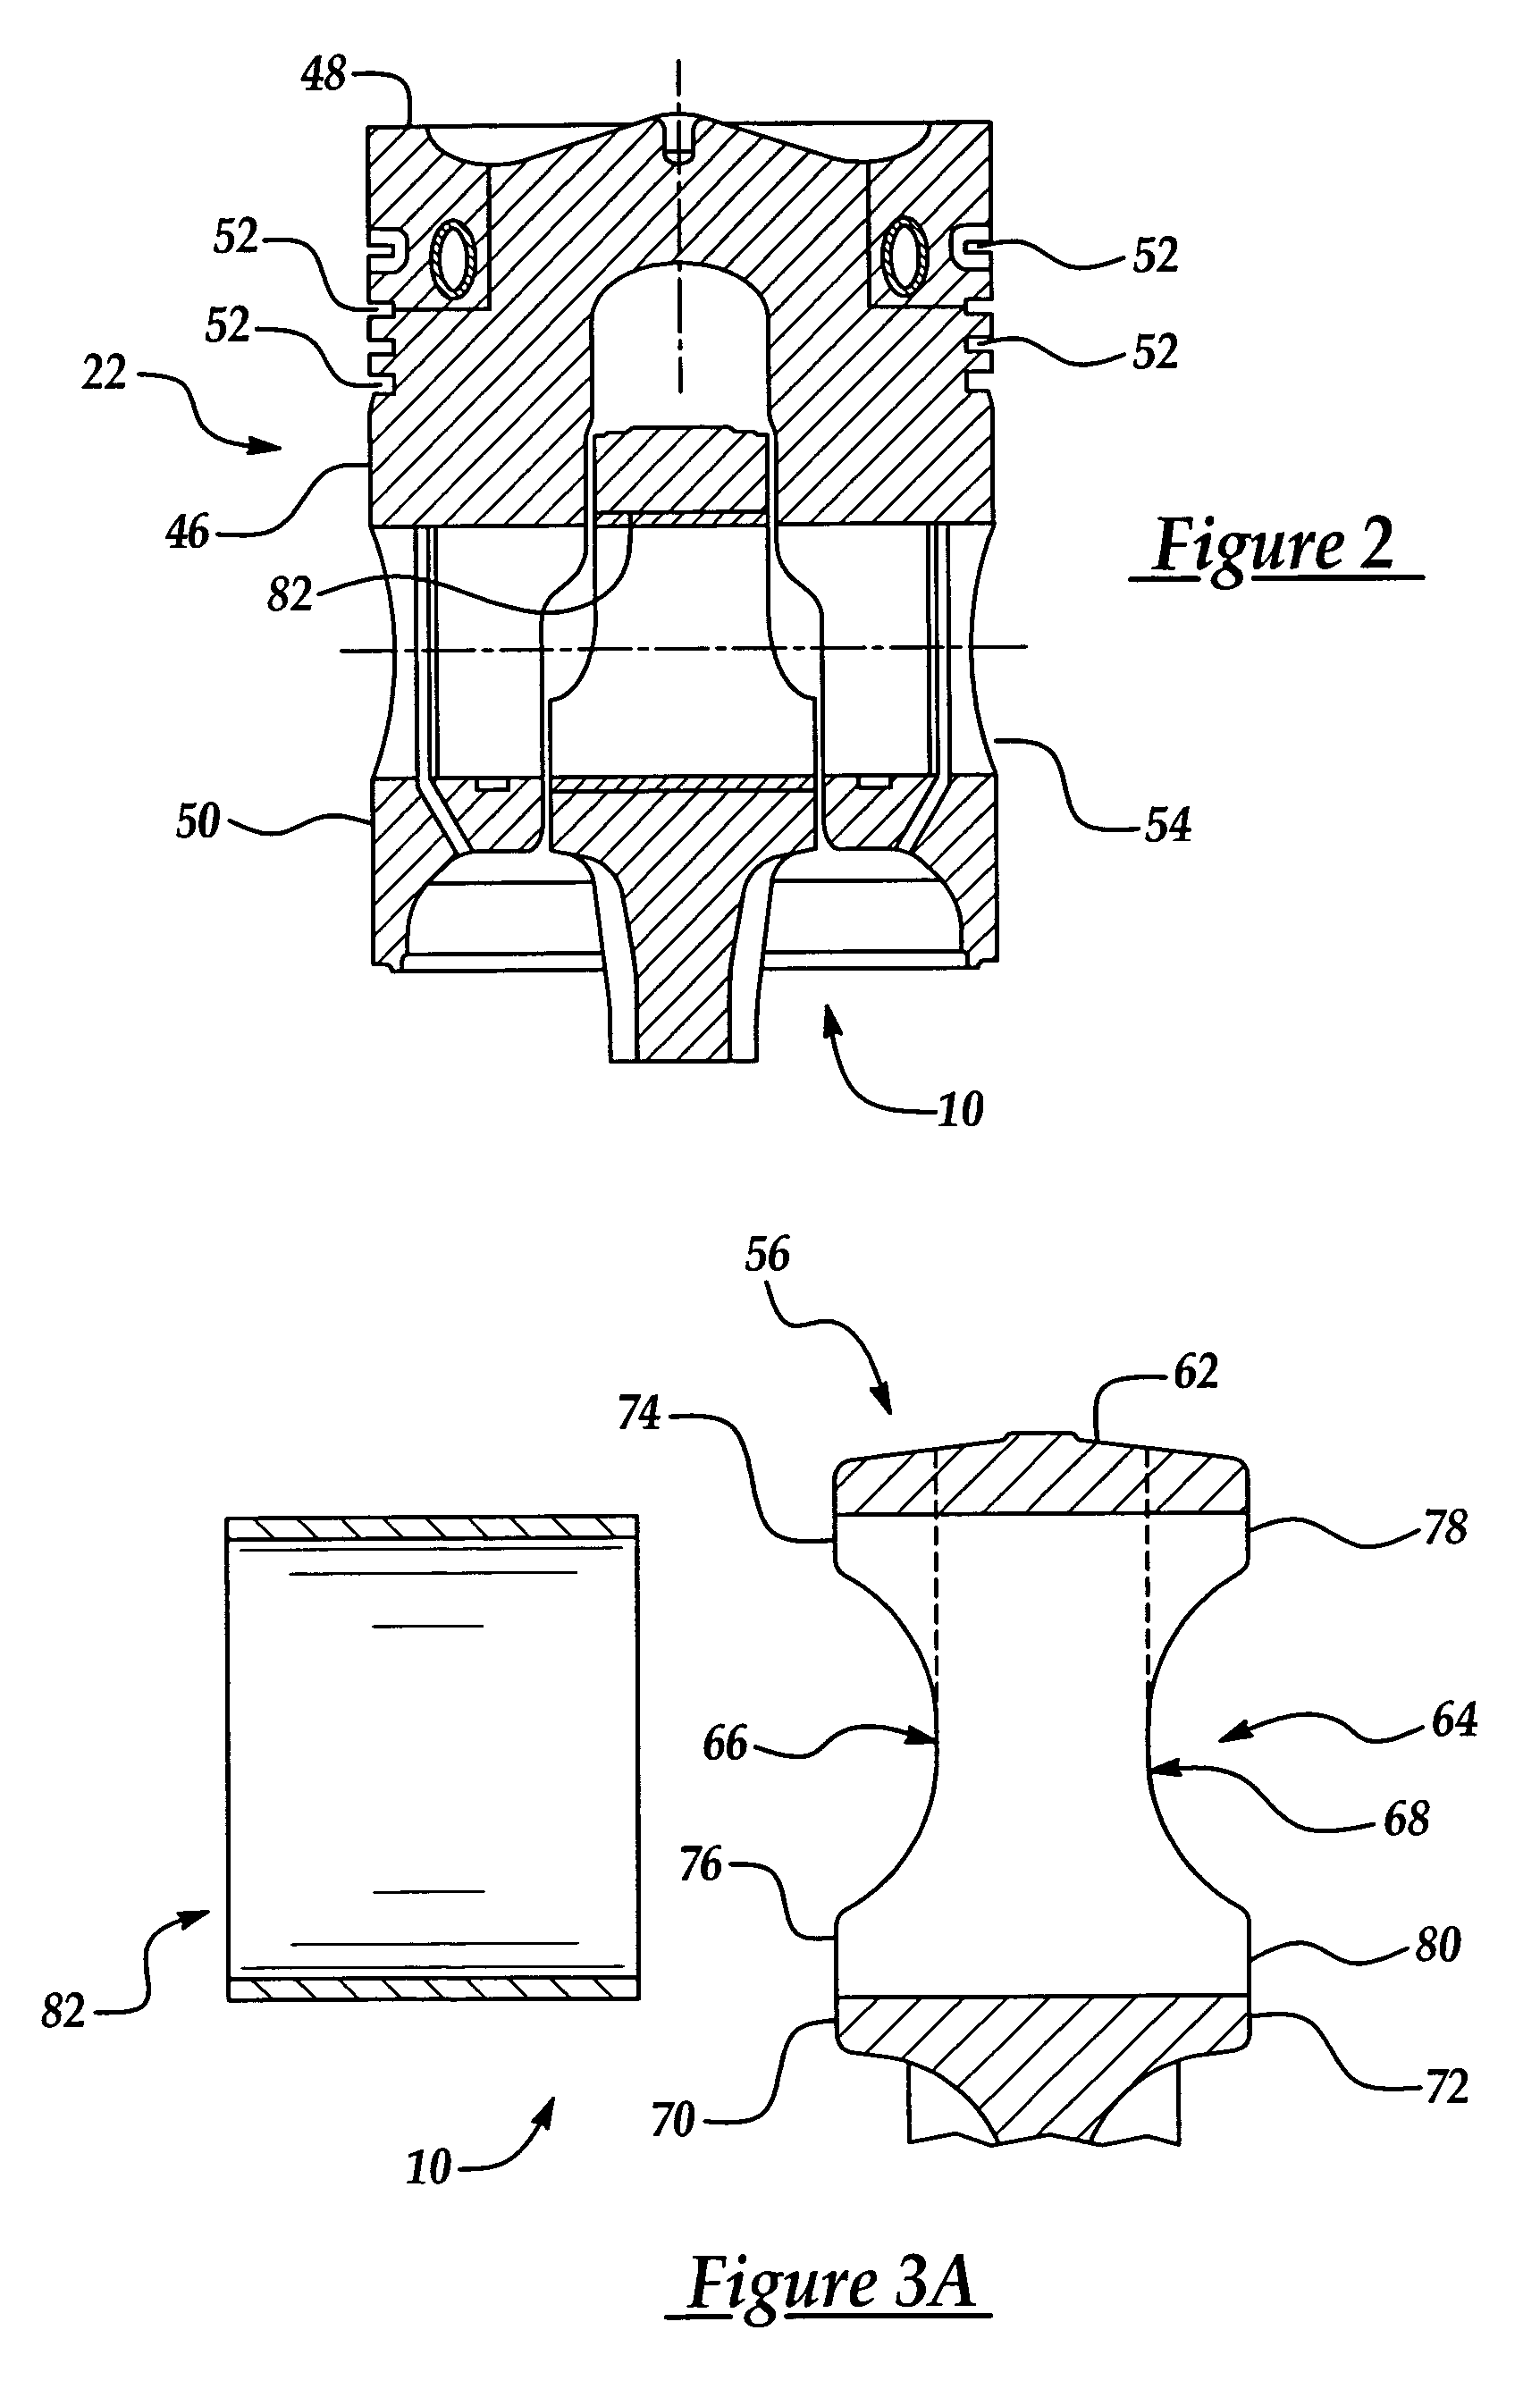 Method of manufacturing a connecting rod assembly for an internal combustion engine